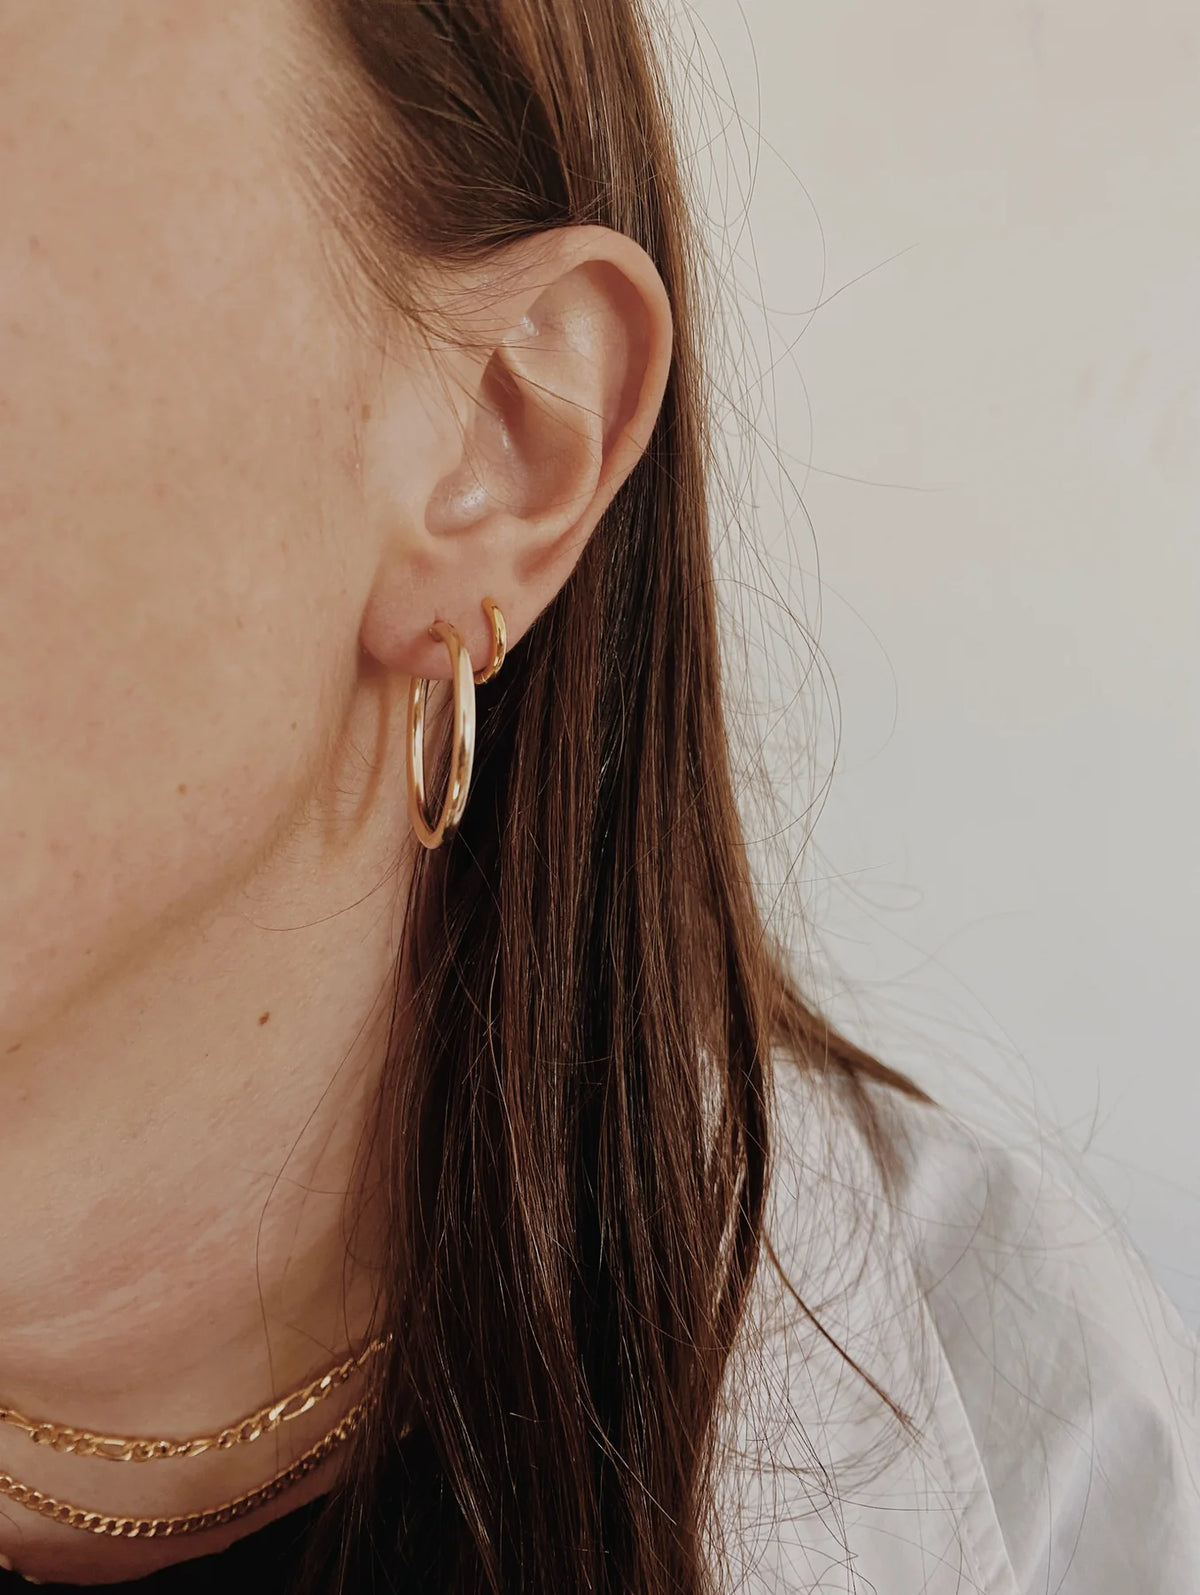 FINERRINGS - Everyday Hoops Gold Fill